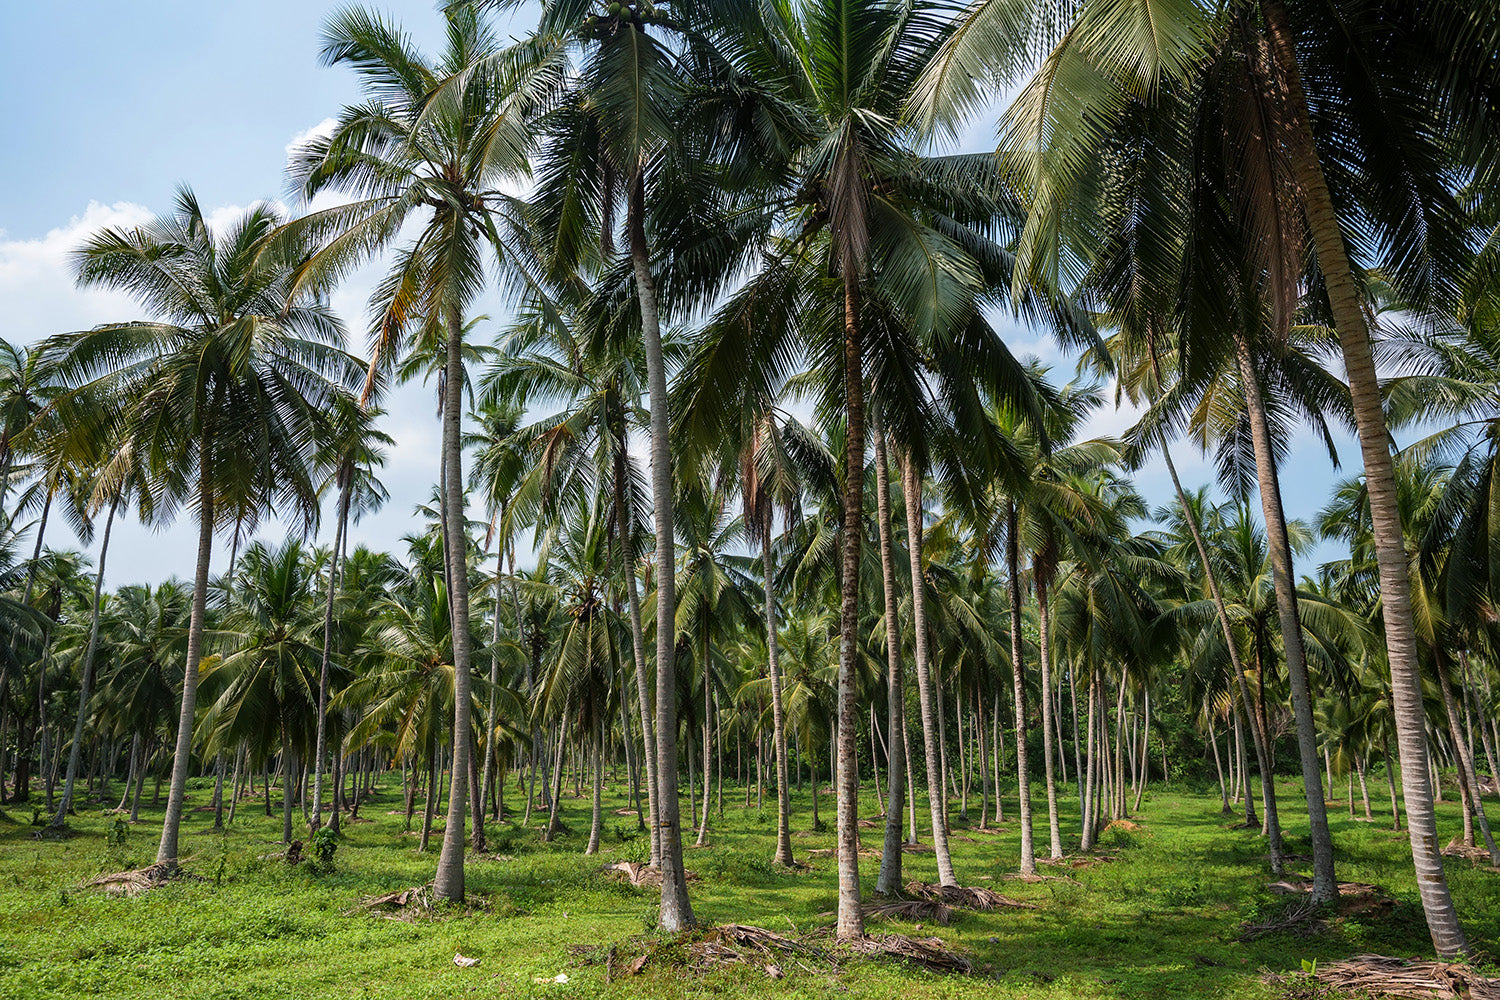 What are the nutrient protection technologies used in coconut farming?